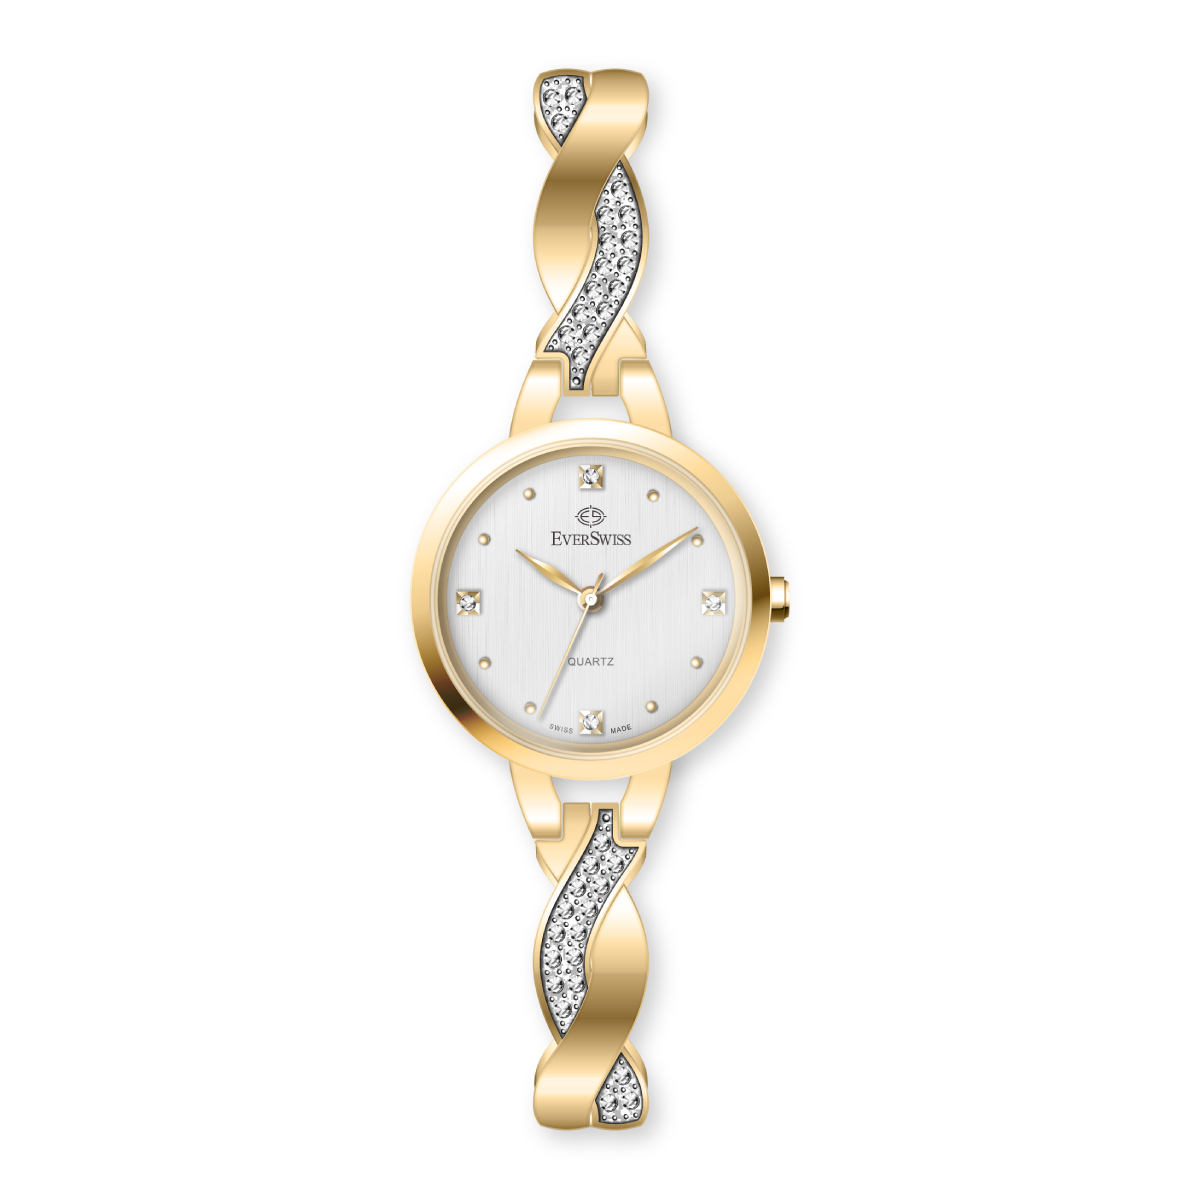 EverSwiss Ladies Dress Watch 2805-LGS - front view